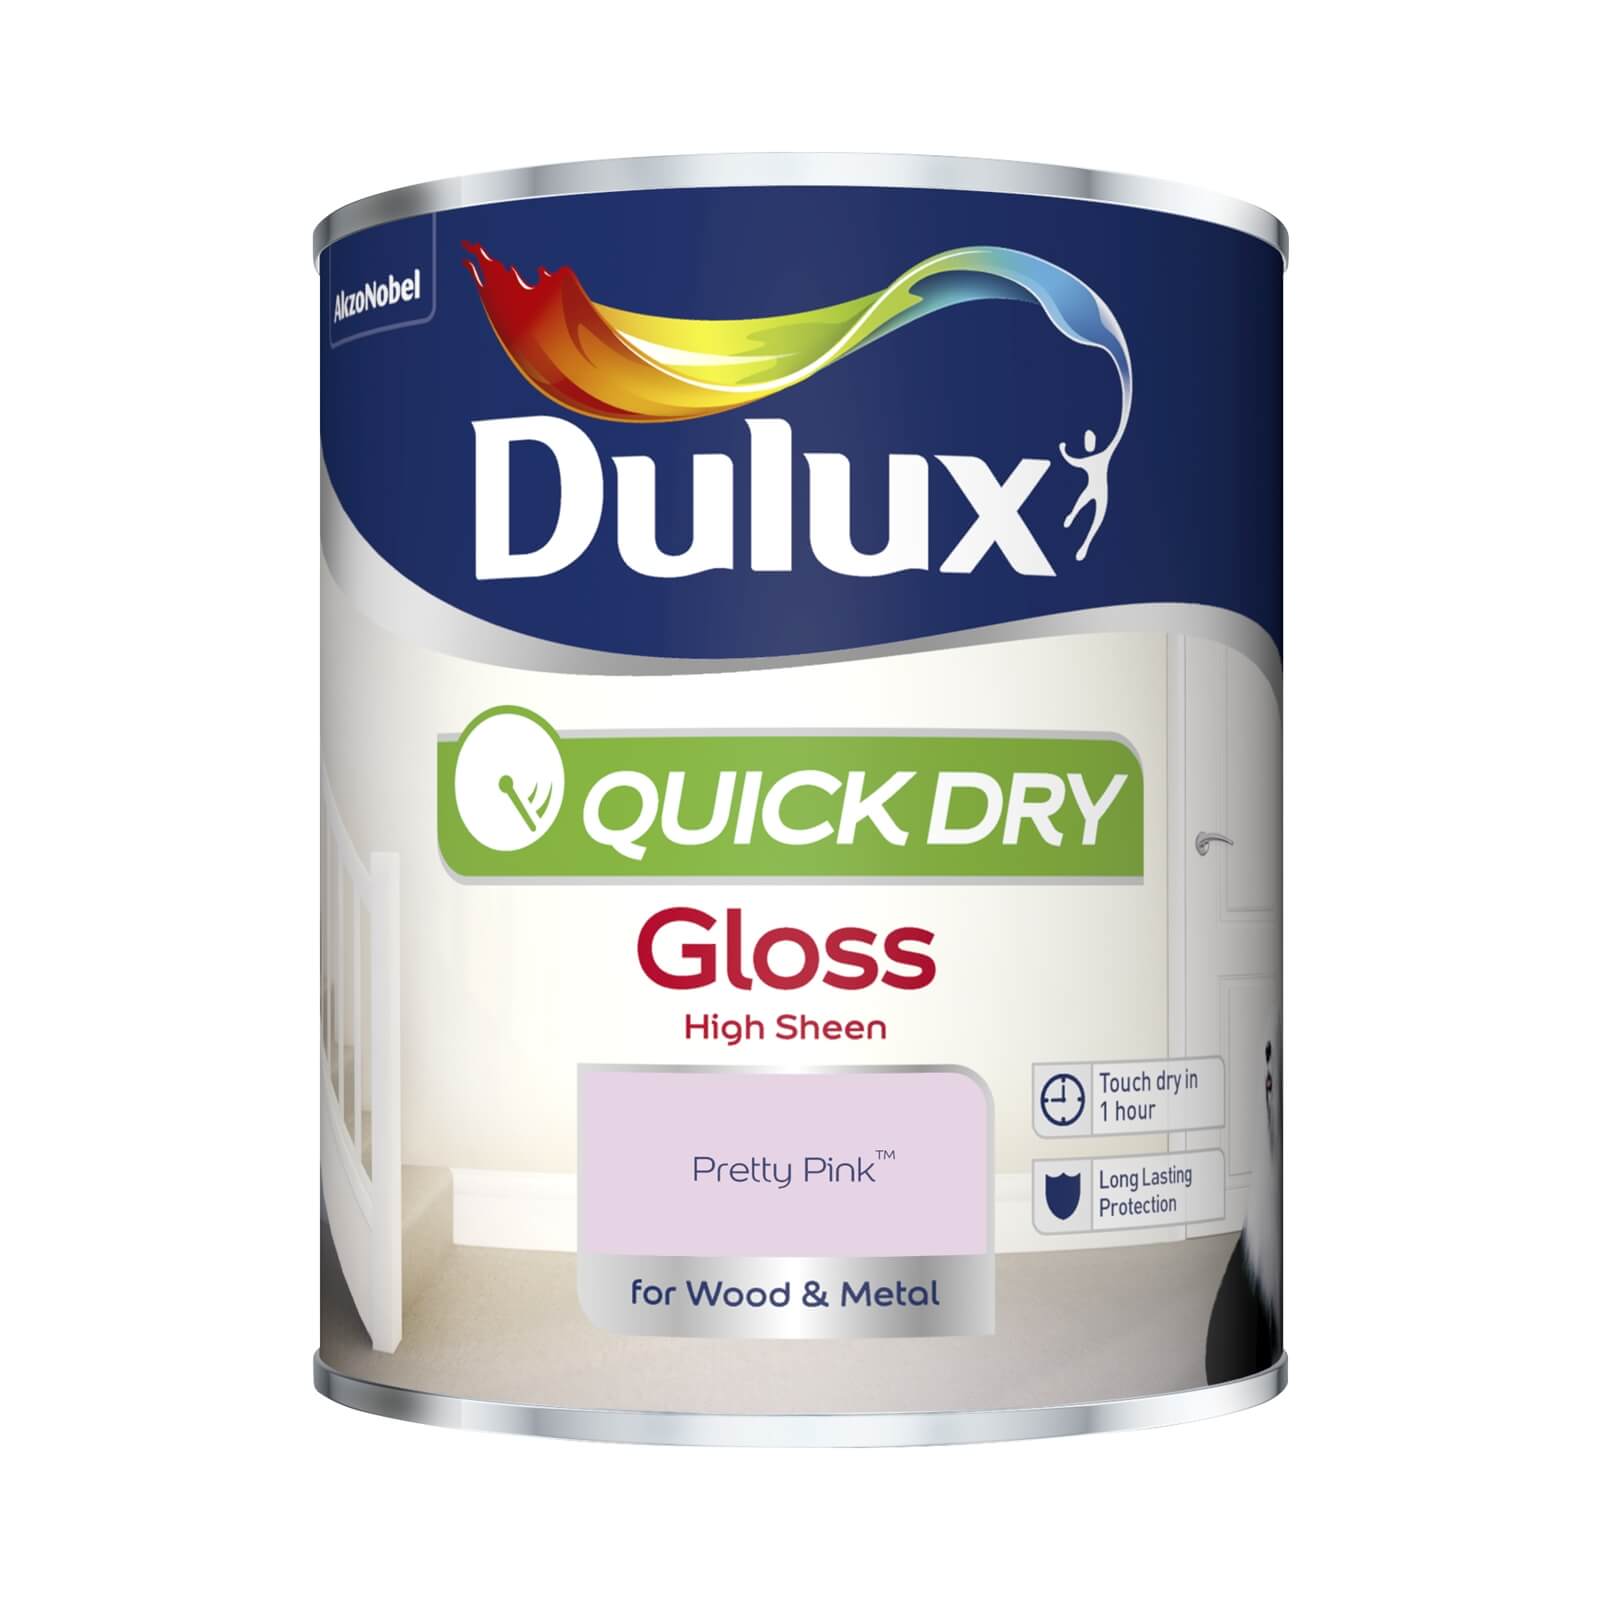 Dulux Quick Dry Gloss Paint Pretty Pink - 750ml